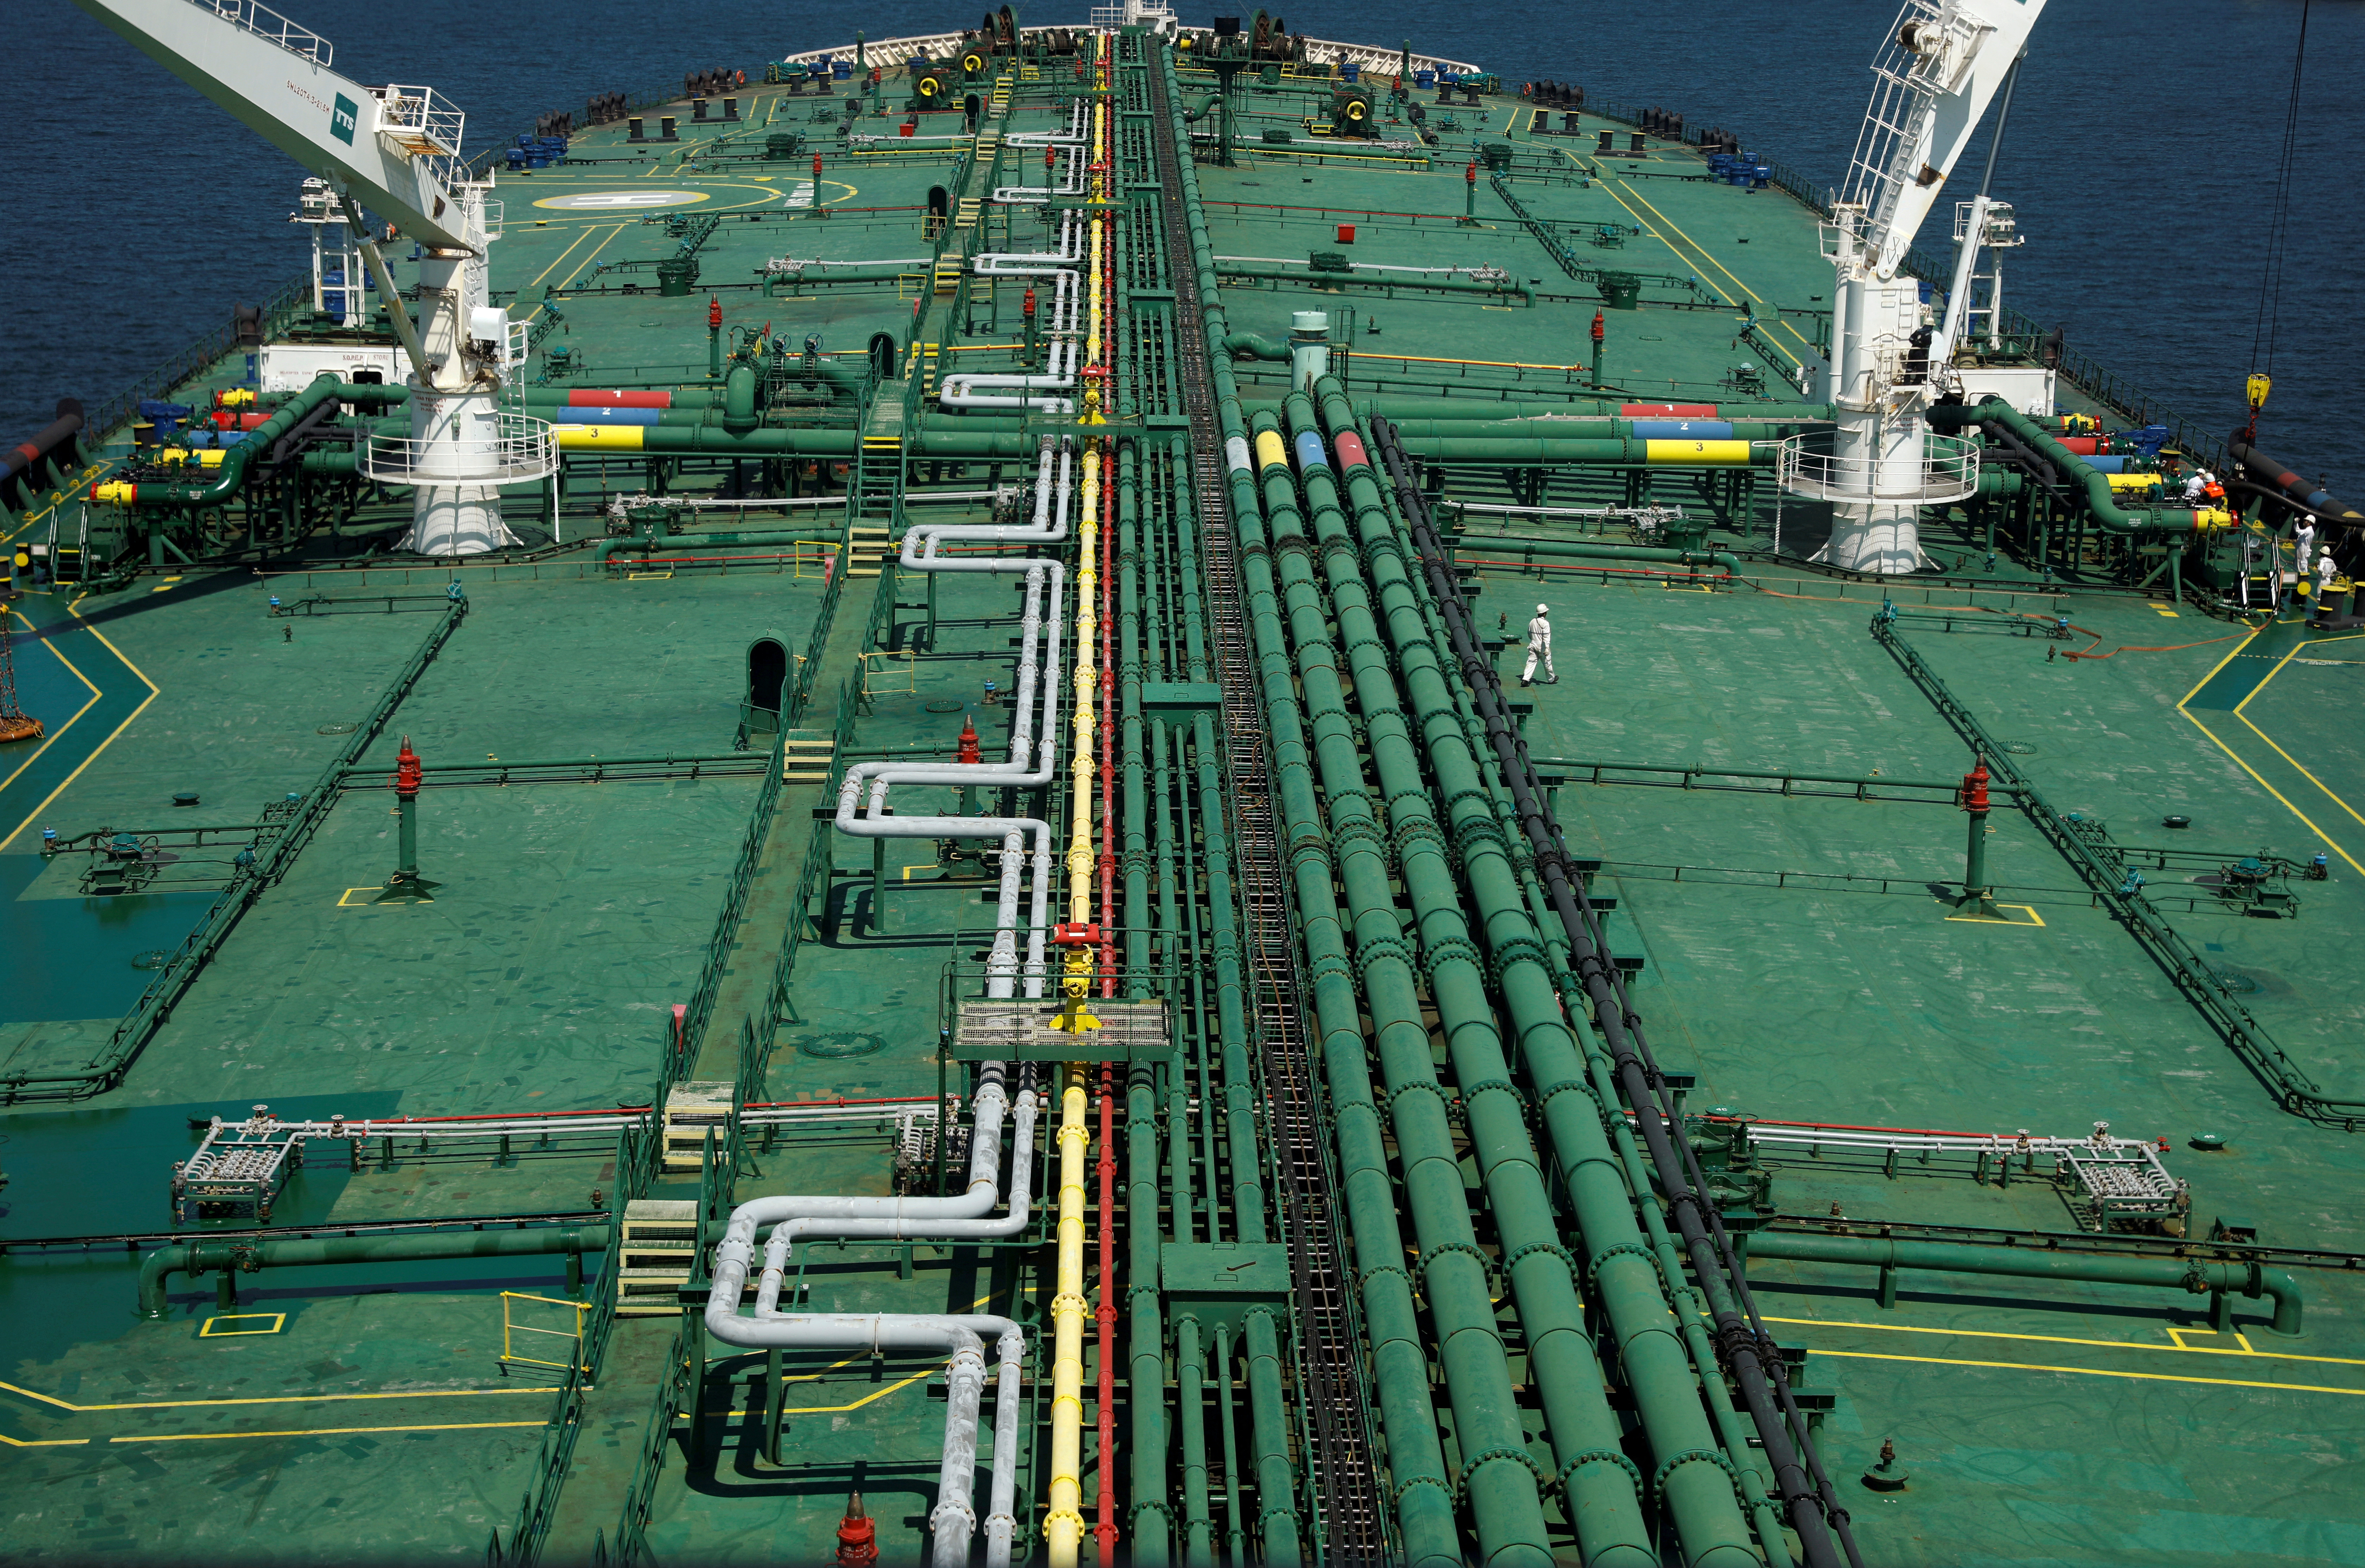 Pipelines run down the deck of Hin Leong's Pu Tuo San VLCC supertanker in the waters off Jurong Island in Singapore